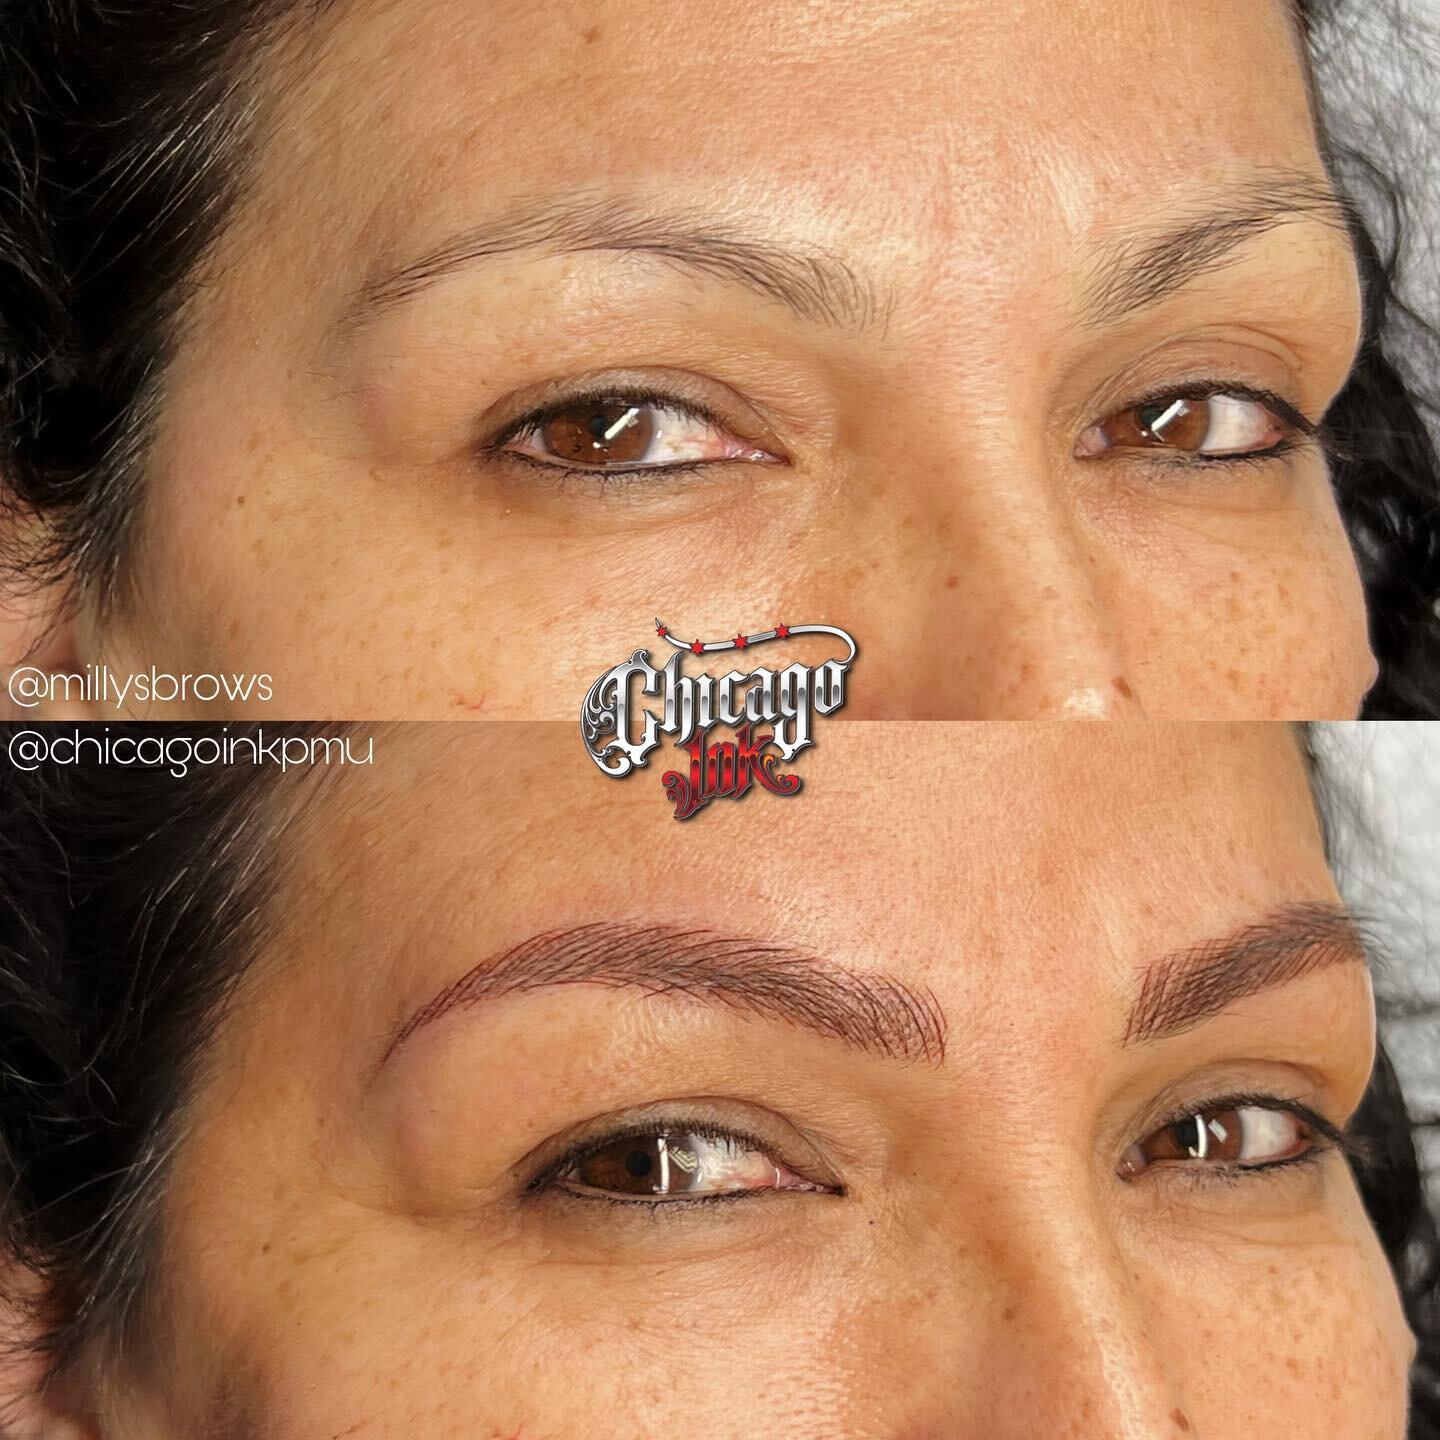 NO FILTER, these are real pics, with real results😍😍
.
.
.
Service: Combo Brows
Artist: @millysbrows
Pigment: @permablend_pigments x @tinadaviesprofessional 
Cost: $650
Location: 3200 N Milwaukee Ave. Chicago, IL
Services, Pre/Post Care, &amp; Booki